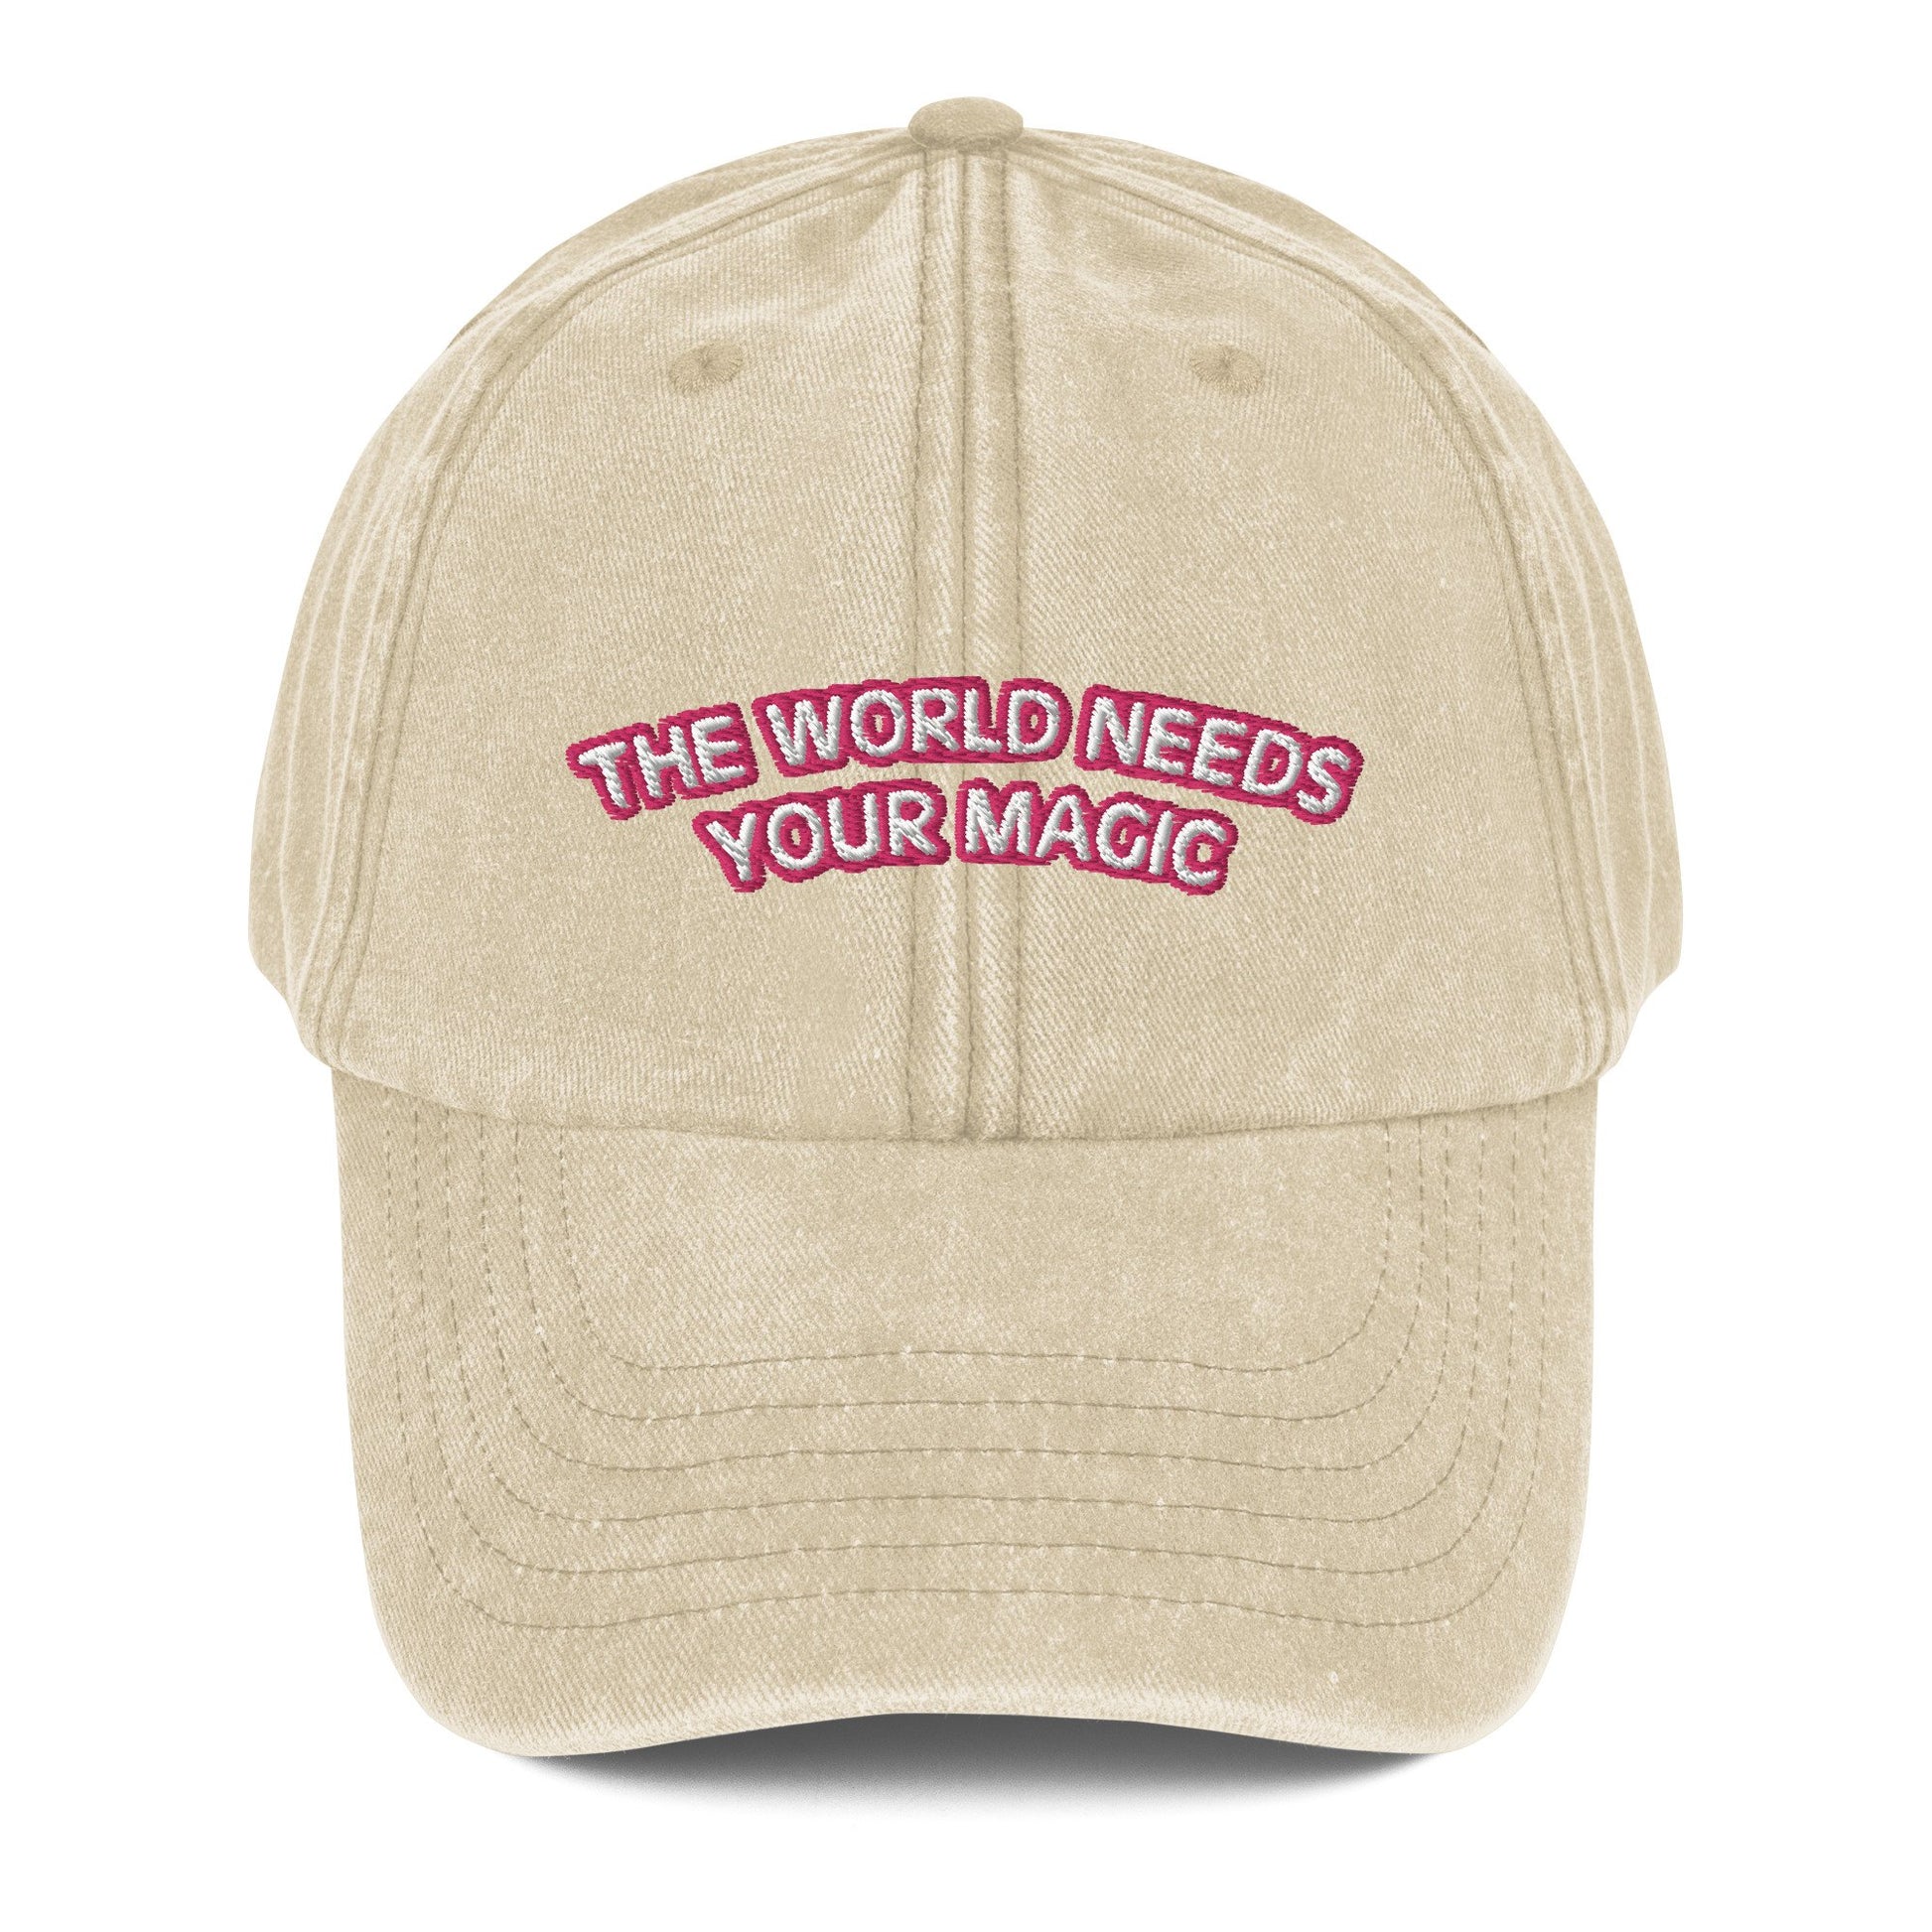 The World Needs Your Magic - Vintage Hat